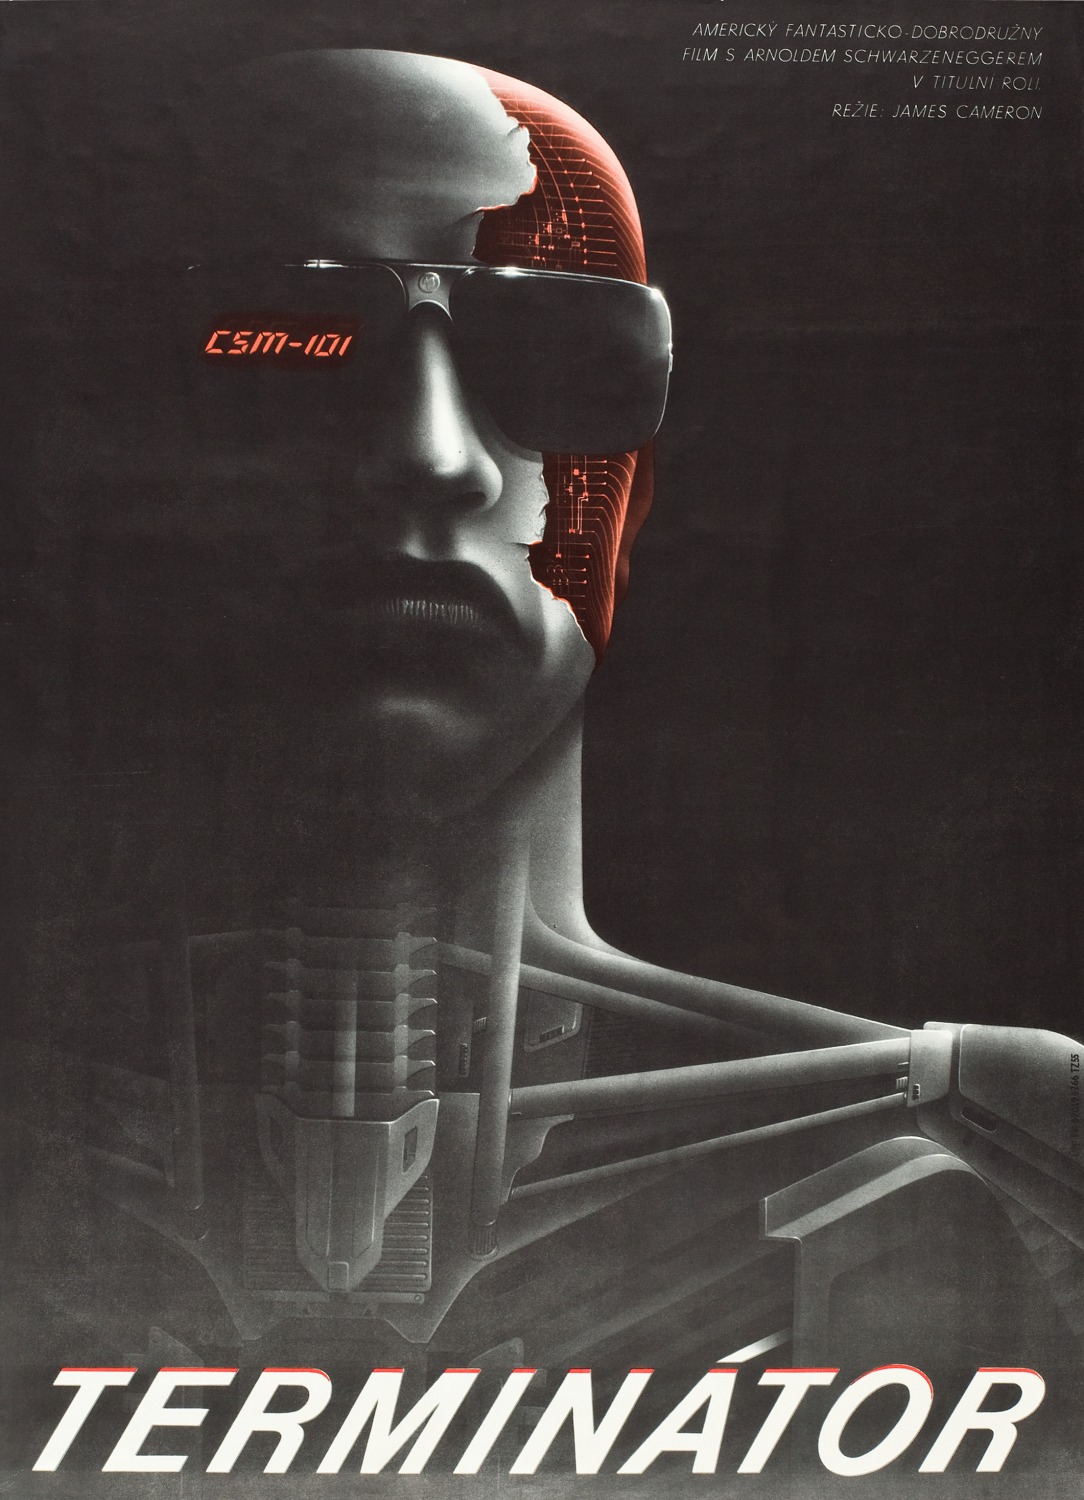 Extra Large Movie Poster Image for The Terminator (#7 of 7)